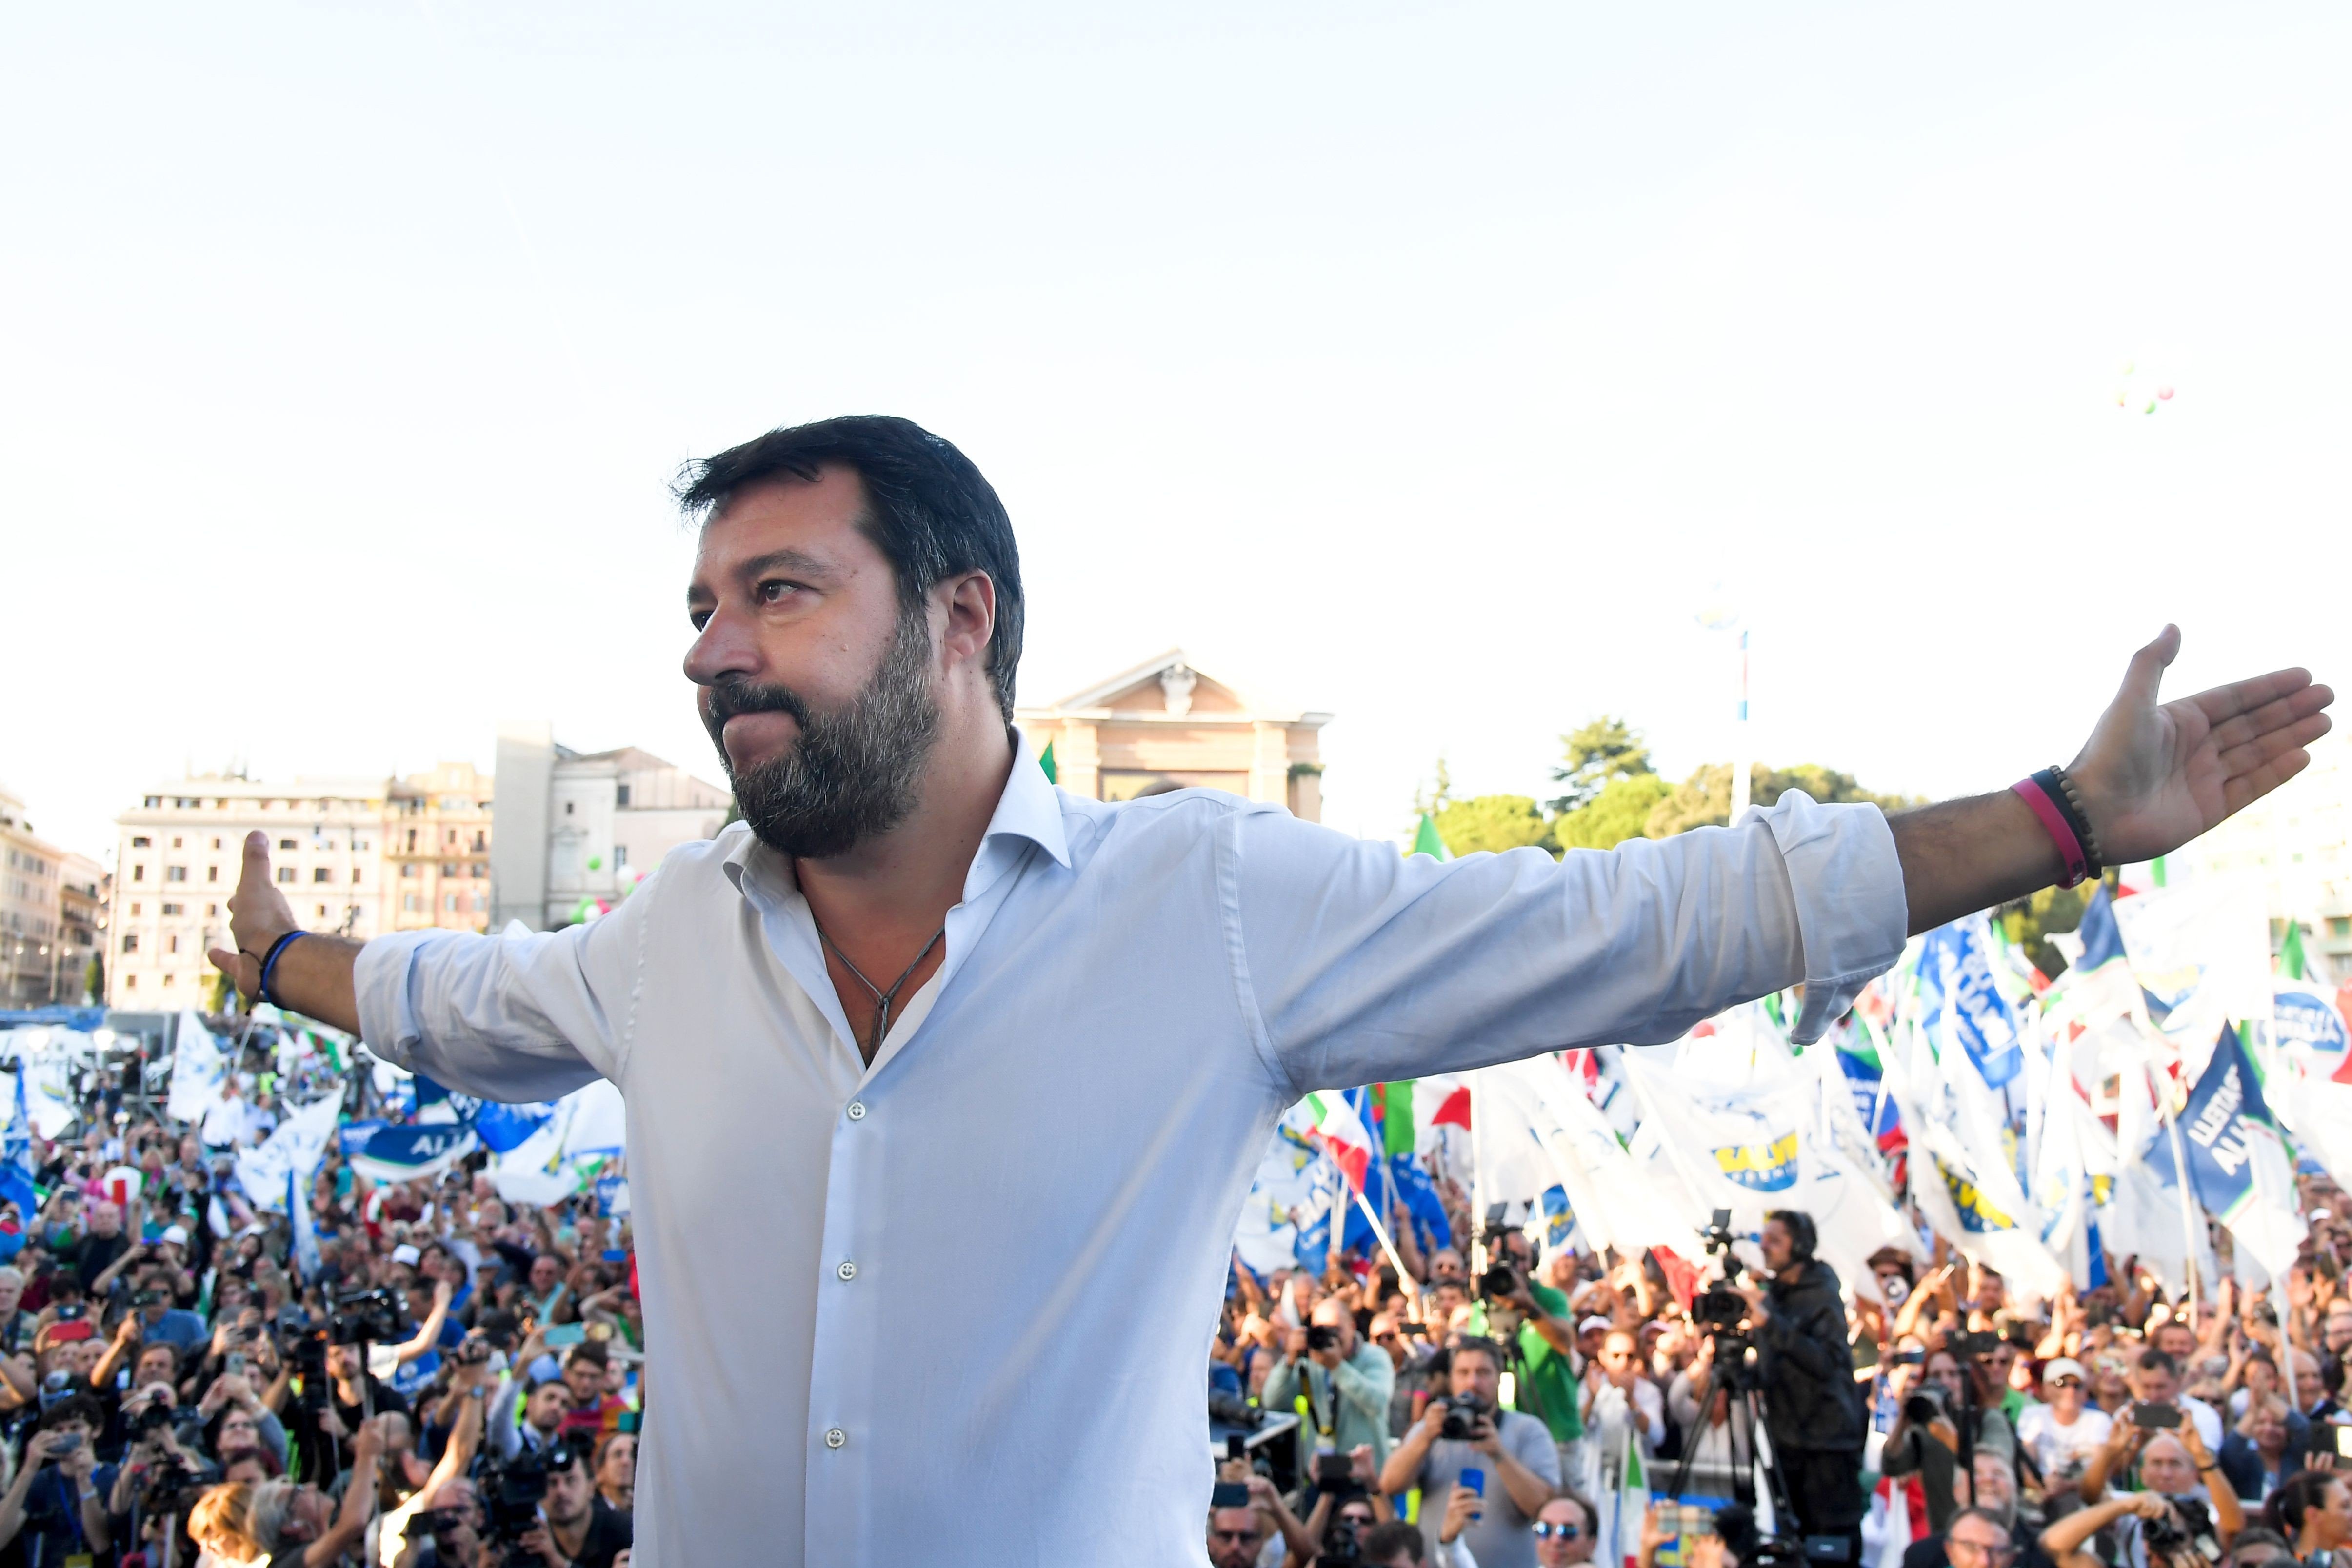 Leader of Italy's far-right League party, Matteo Salvini gestures as he prepares to address supporters during a rally of Italy's far-right League party. Photo: AFP